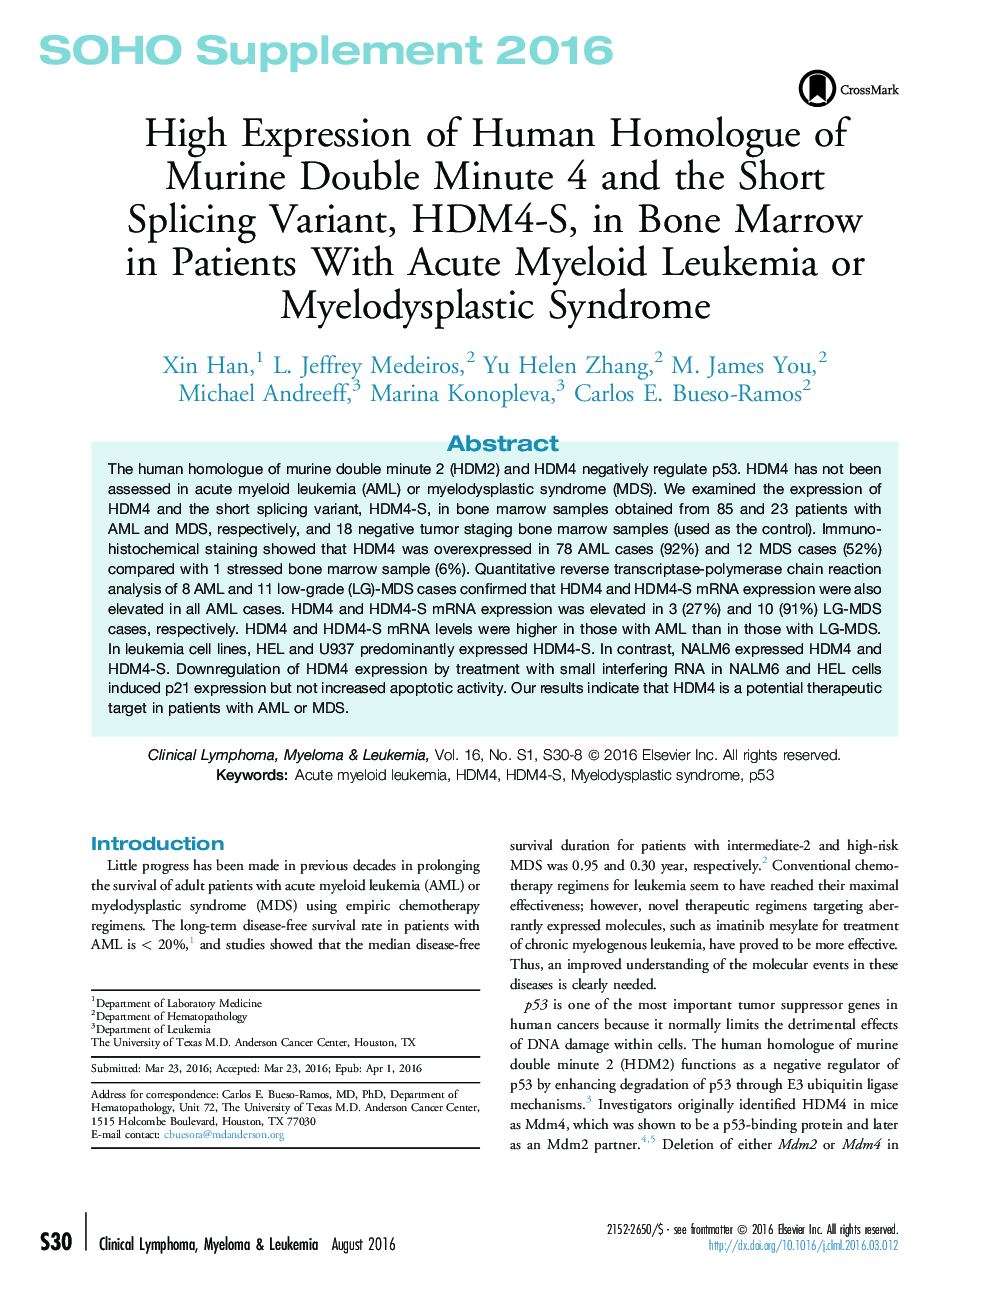 High Expression of Human Homologue of Murine Double Minute 4 and the Short Splicing Variant, HDM4-S, in Bone Marrow in Patients With Acute Myeloid Leukemia or Myelodysplastic Syndrome